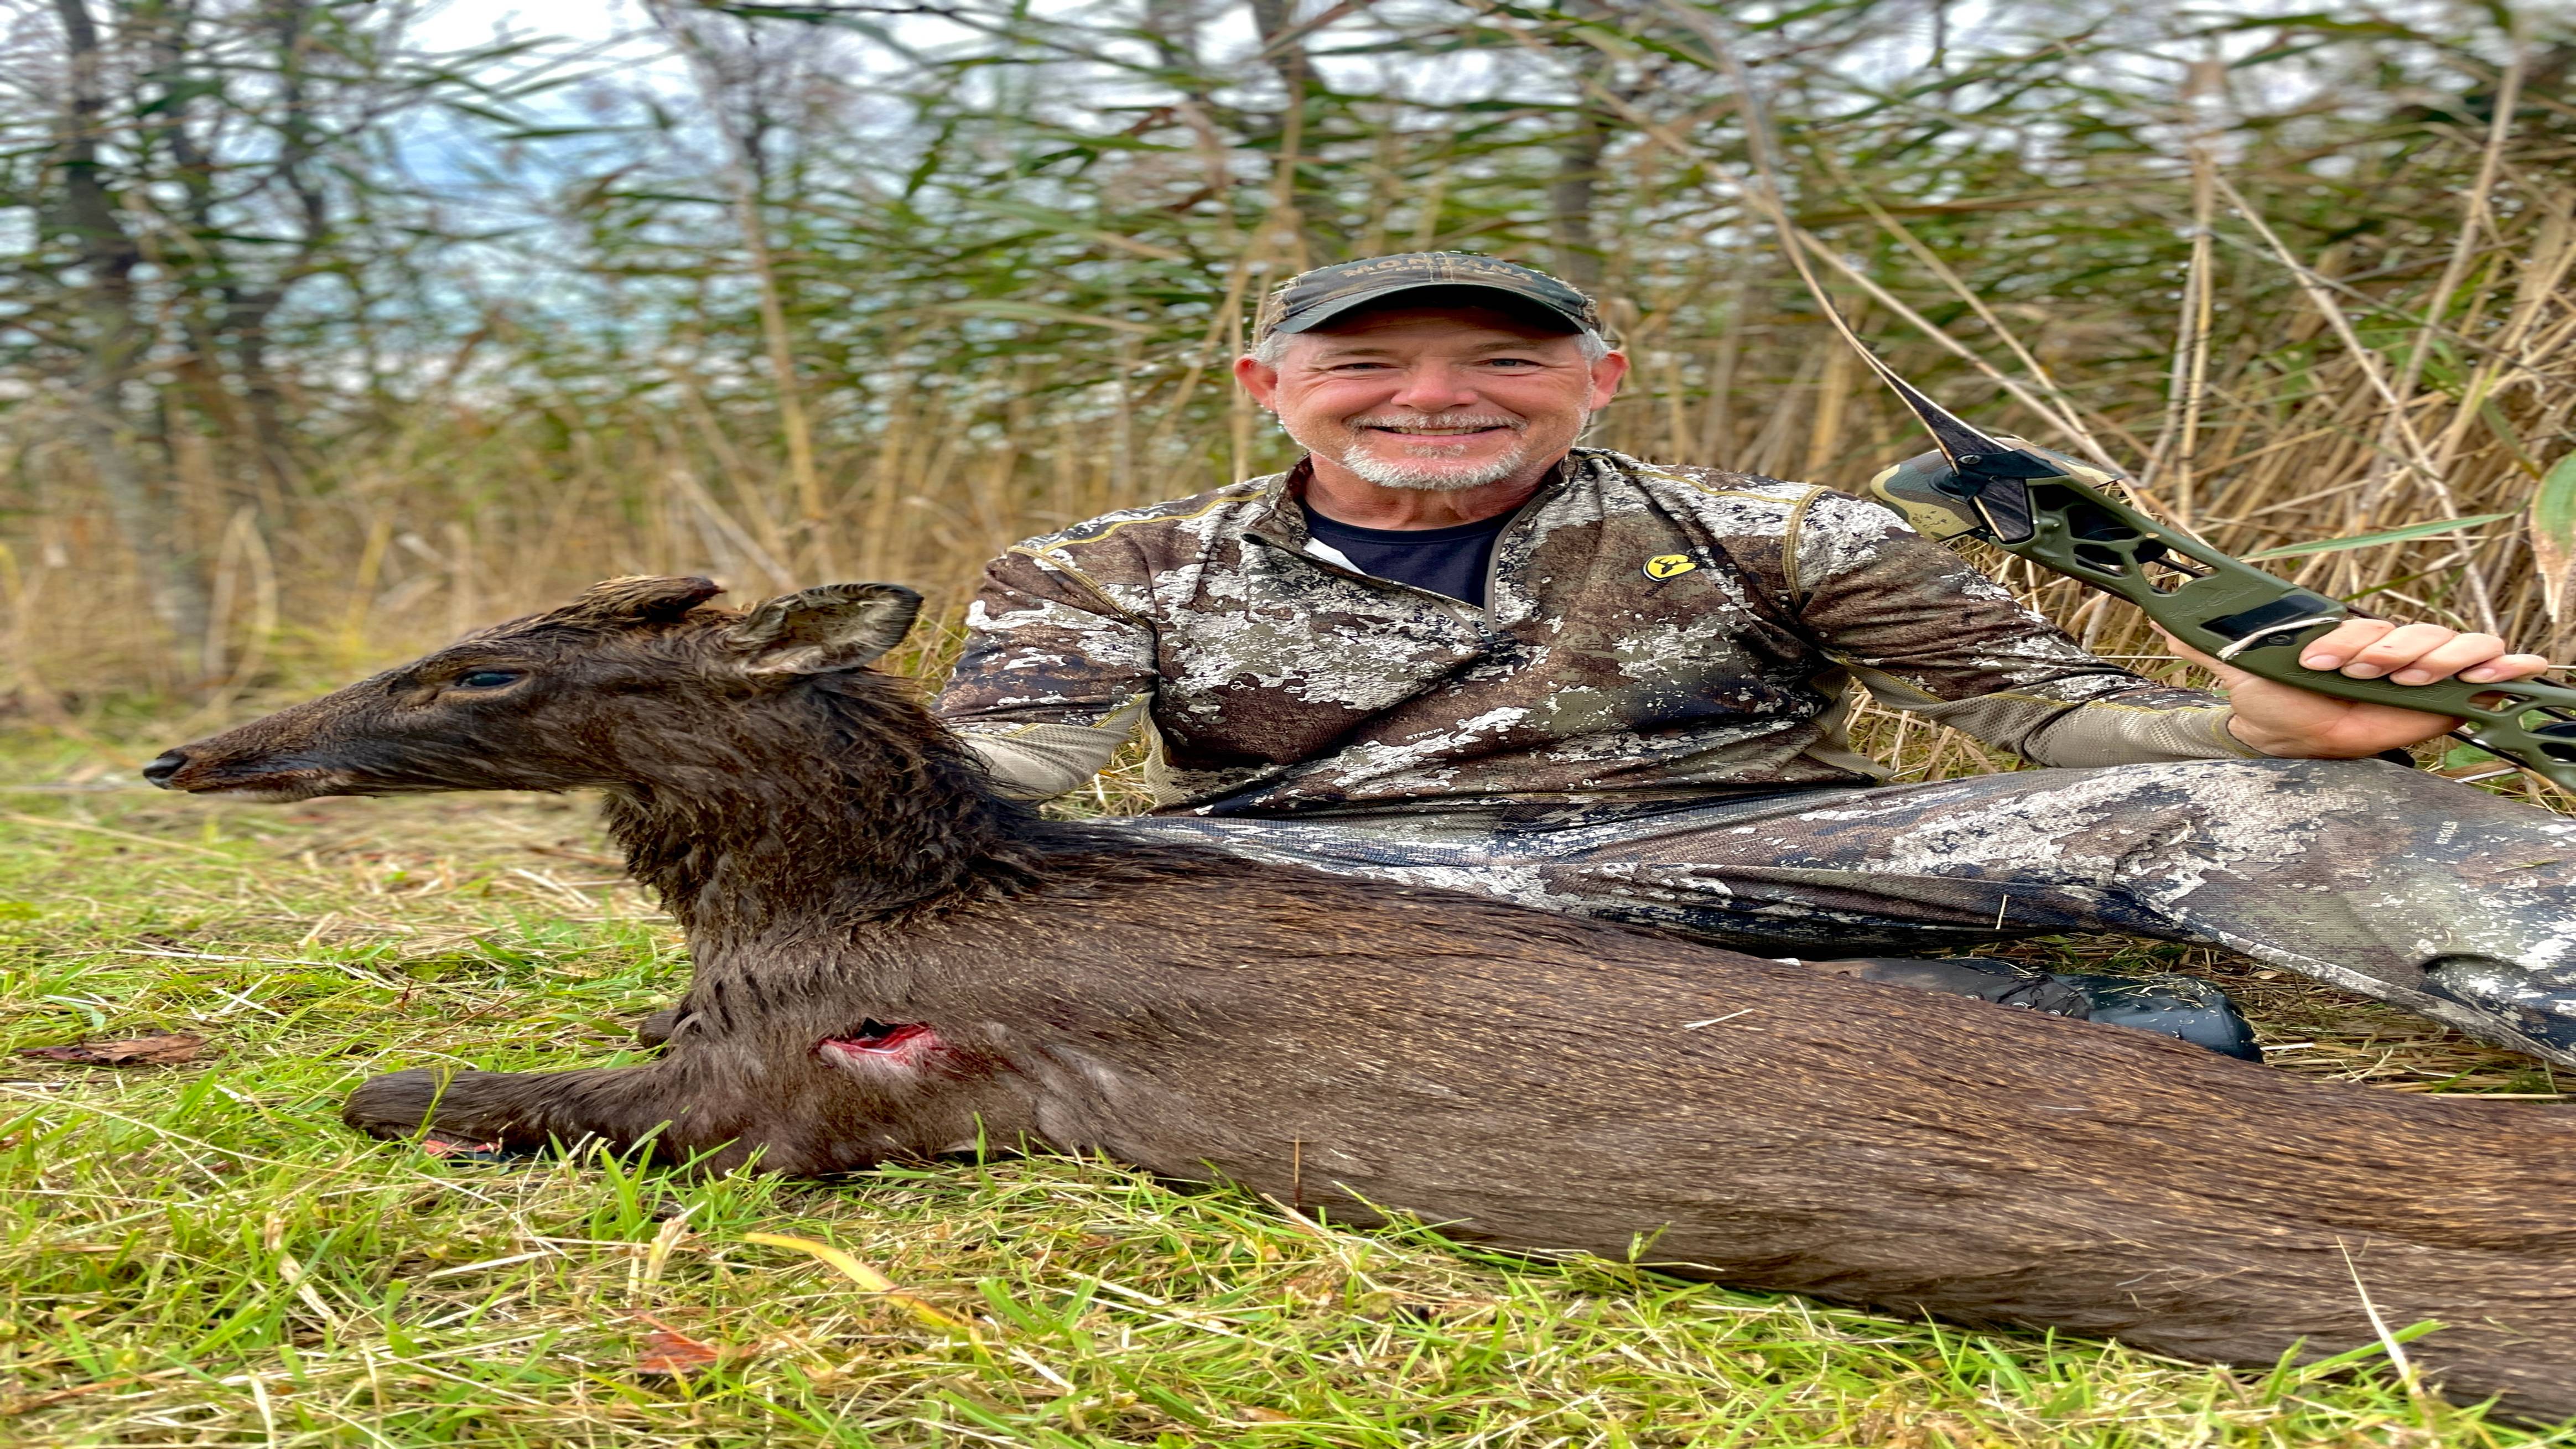 Fred Eicher using Fred Eichler Signature Series Riser Bow to harvest Sika Deer in Maryland